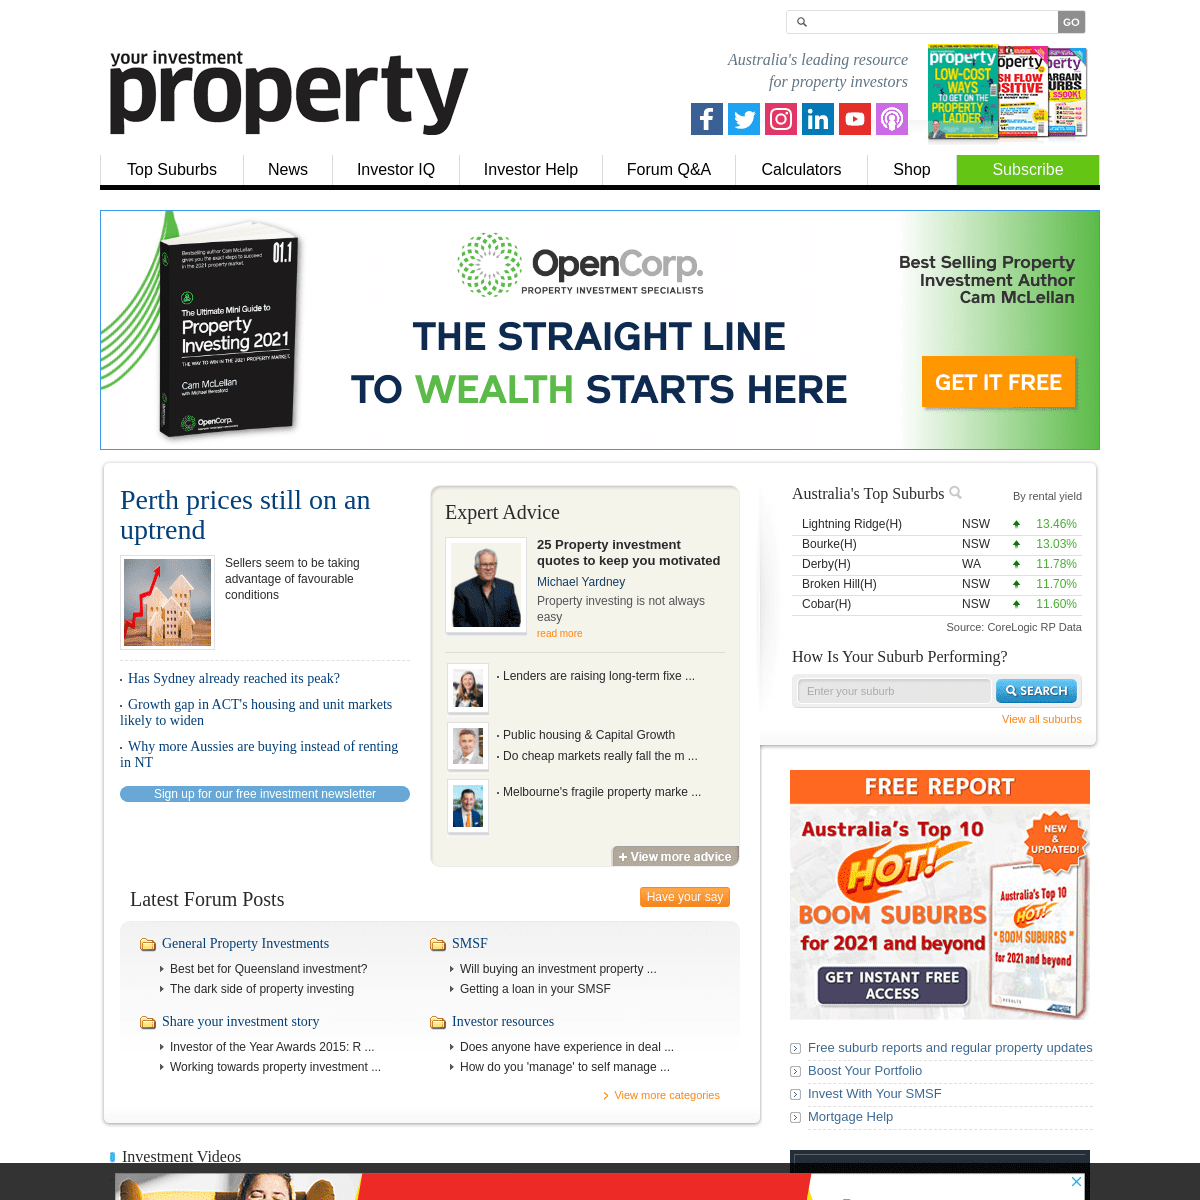 A complete backup of https://yourinvestmentpropertymag.com.au